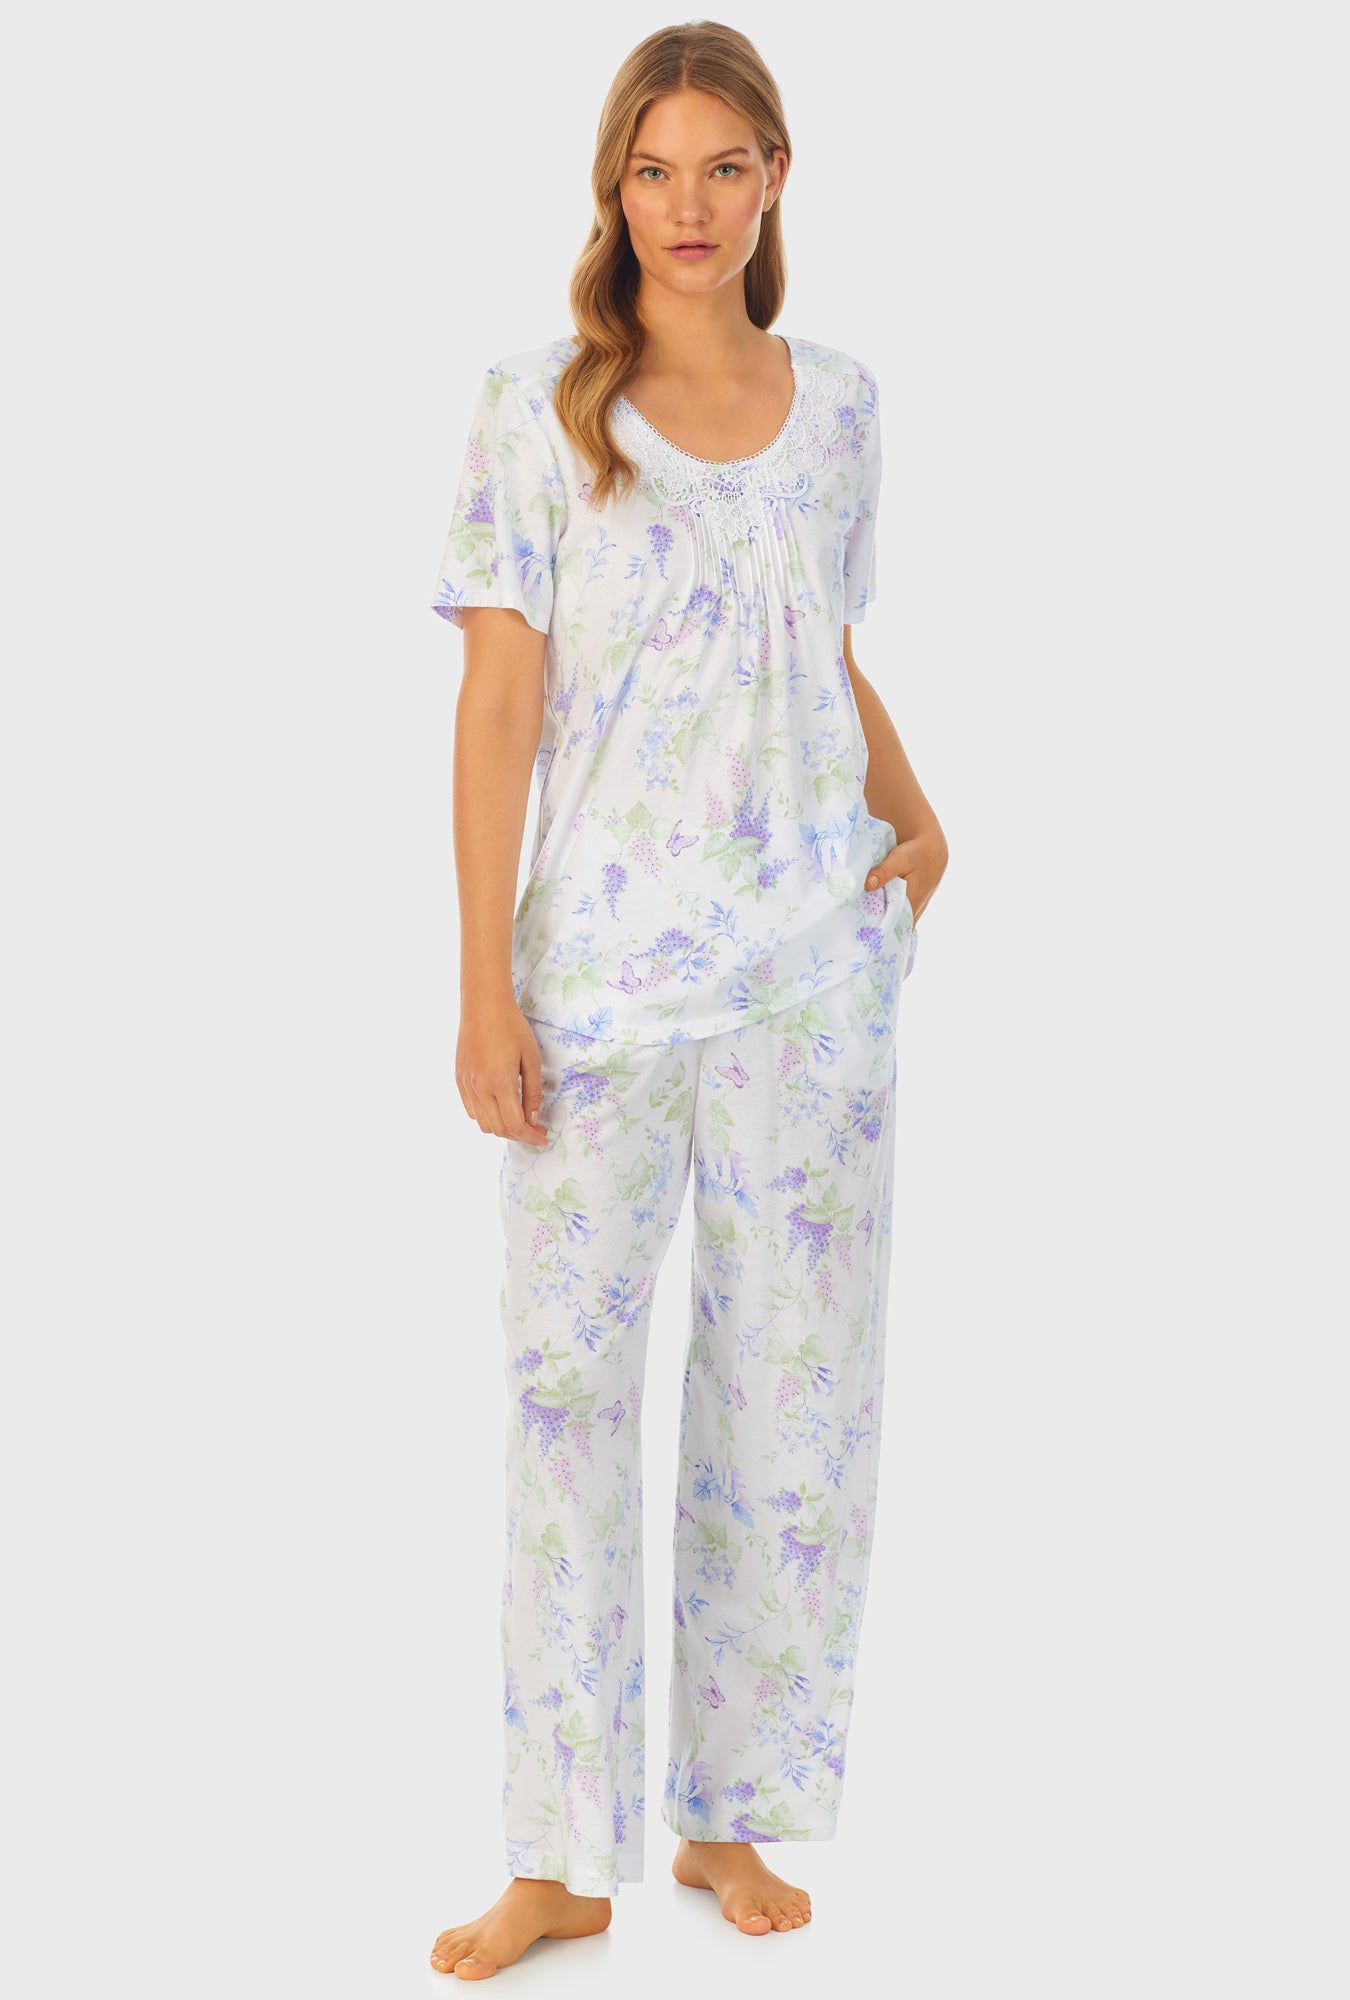 A lady wearing Cotton Long Pajama Set with Butterfly Garden print